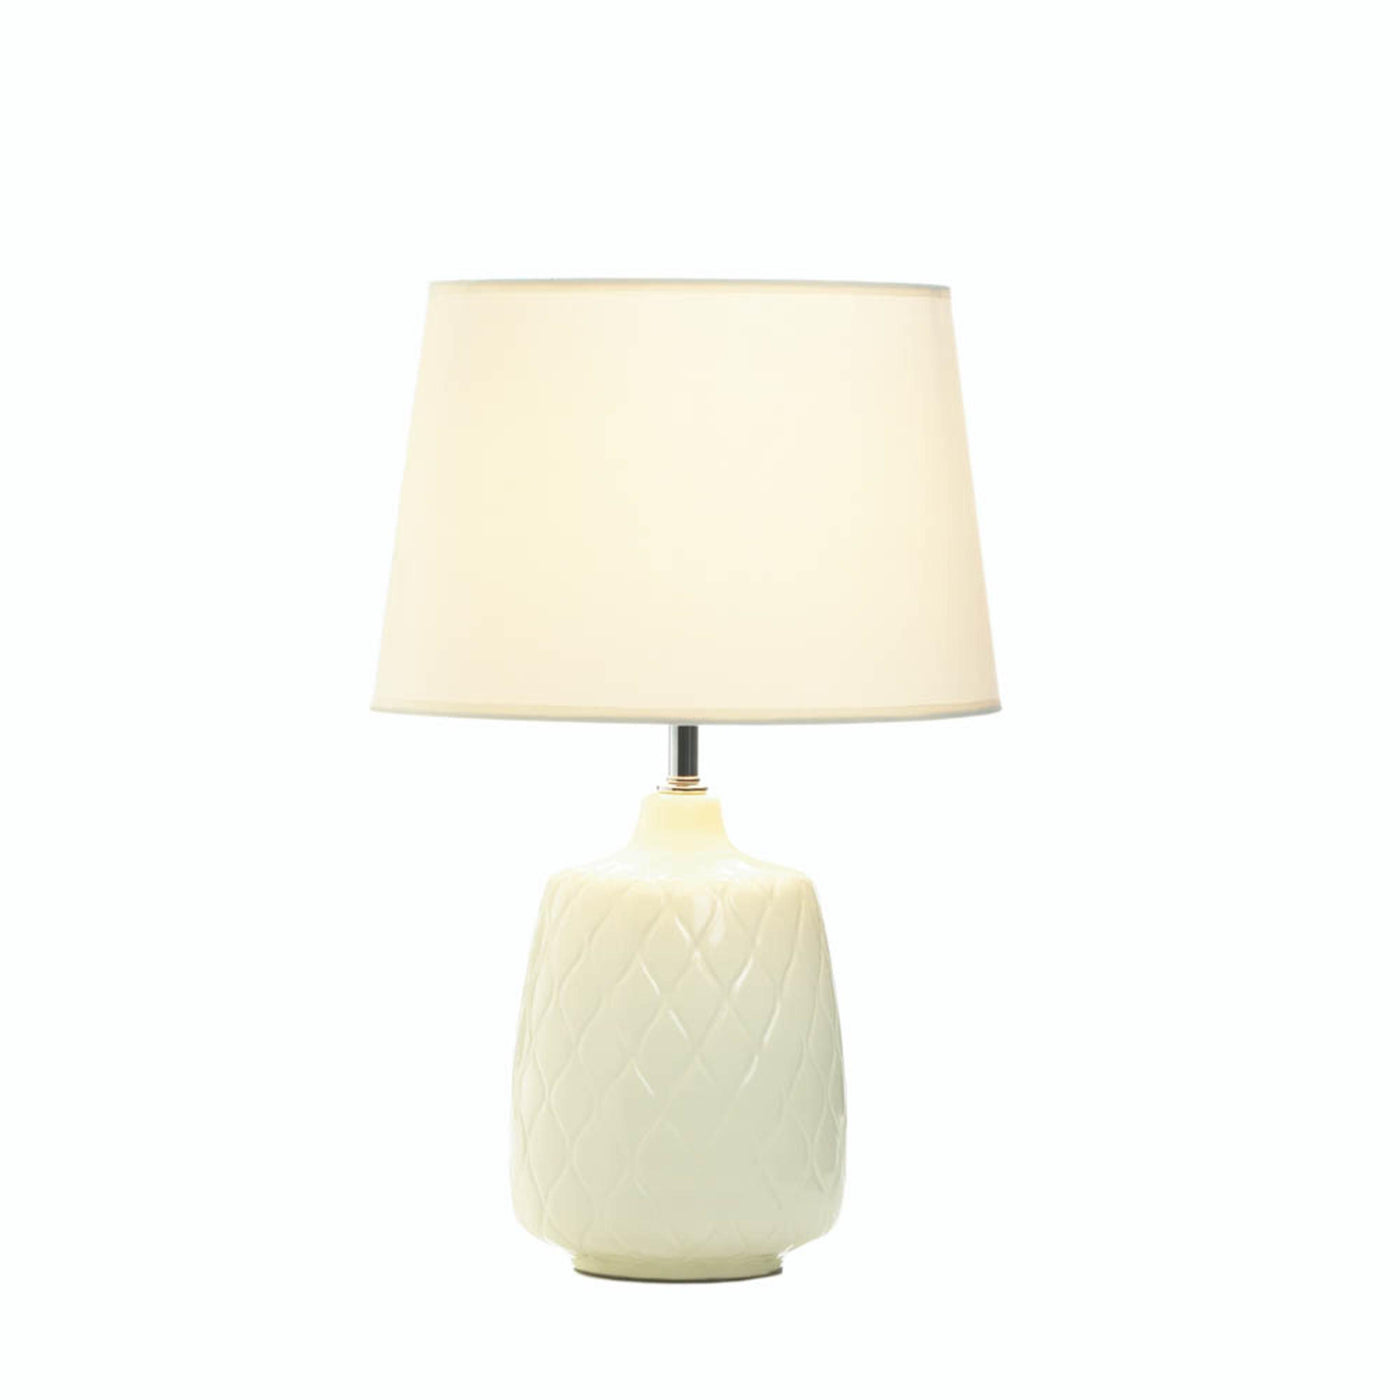 QUILTED DIAMONDS TABLE LAMP – Sigma Distributors